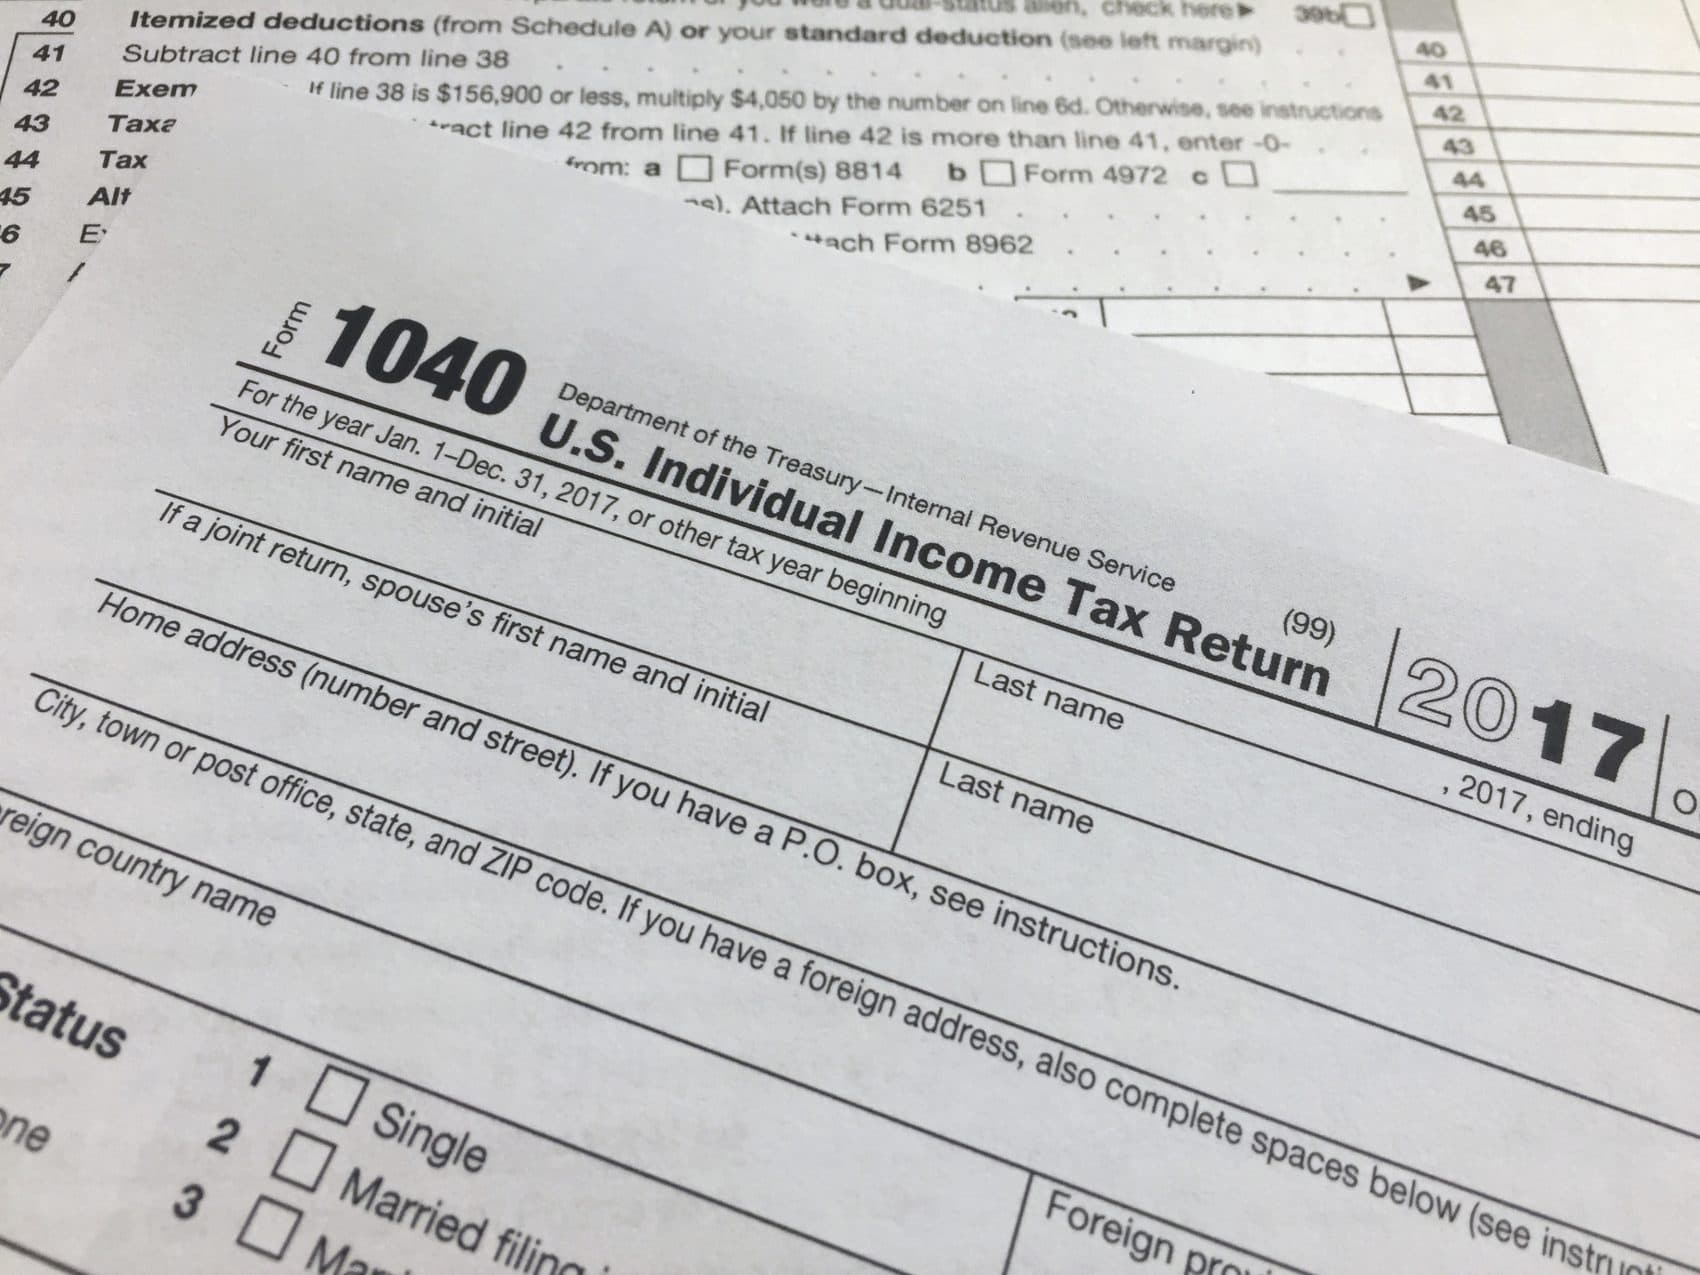 Irs Schedule 1 2022 Instructions Tax Season Is Right Around The Corner: Here's How You Can Get A Head Start  Before 2022 | Here & Now